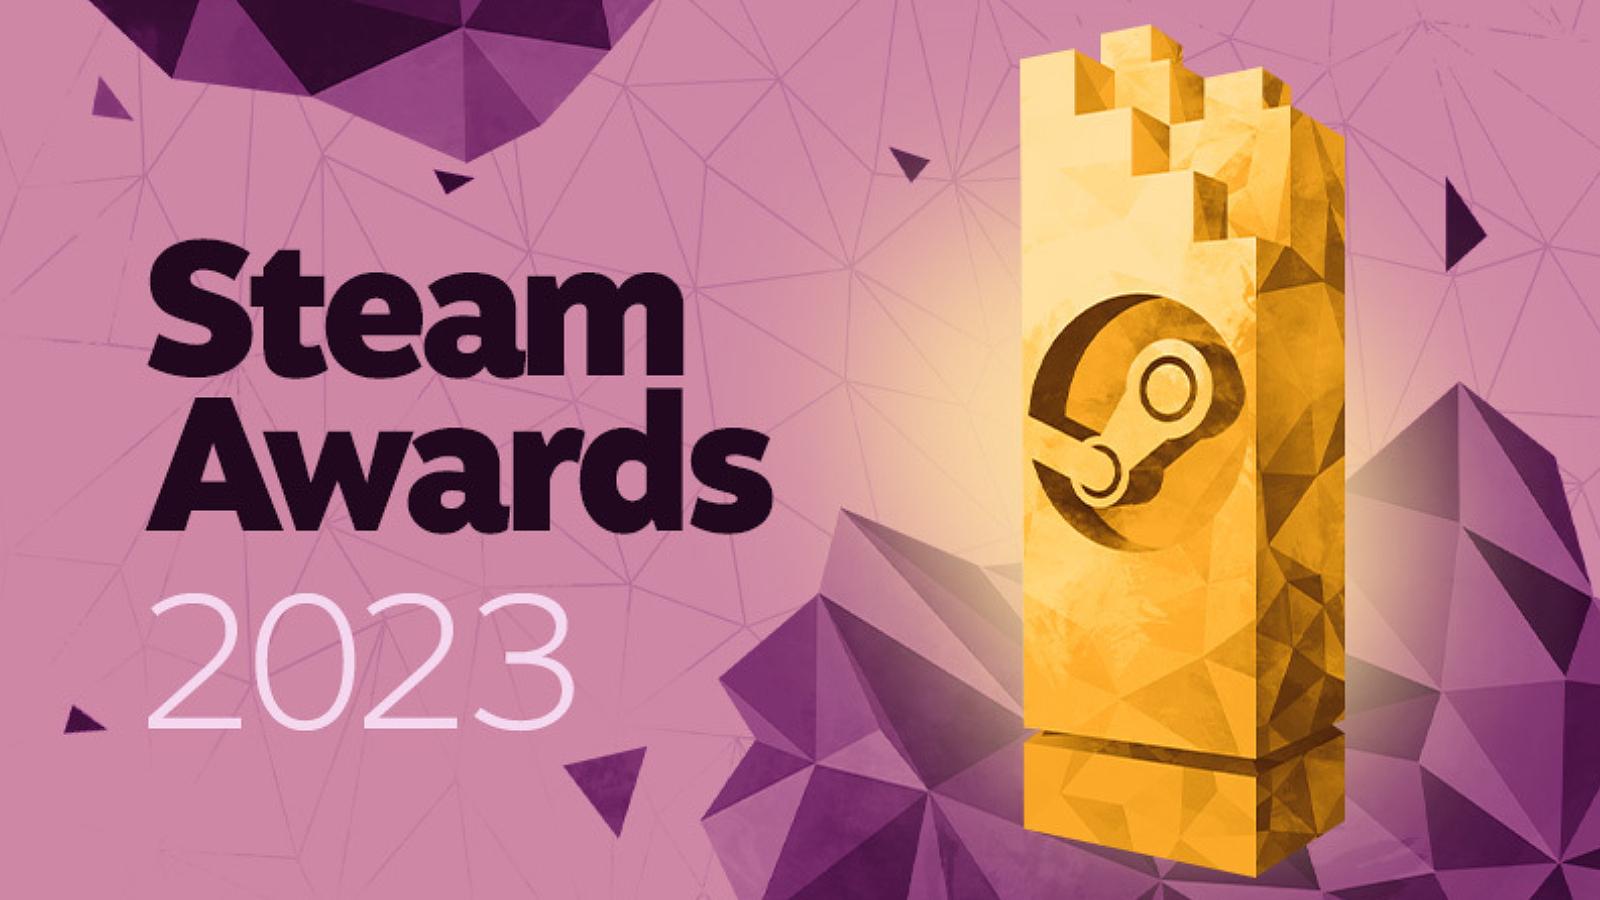 Steam Awards 2023 winners called a “sick joke” as players want voting